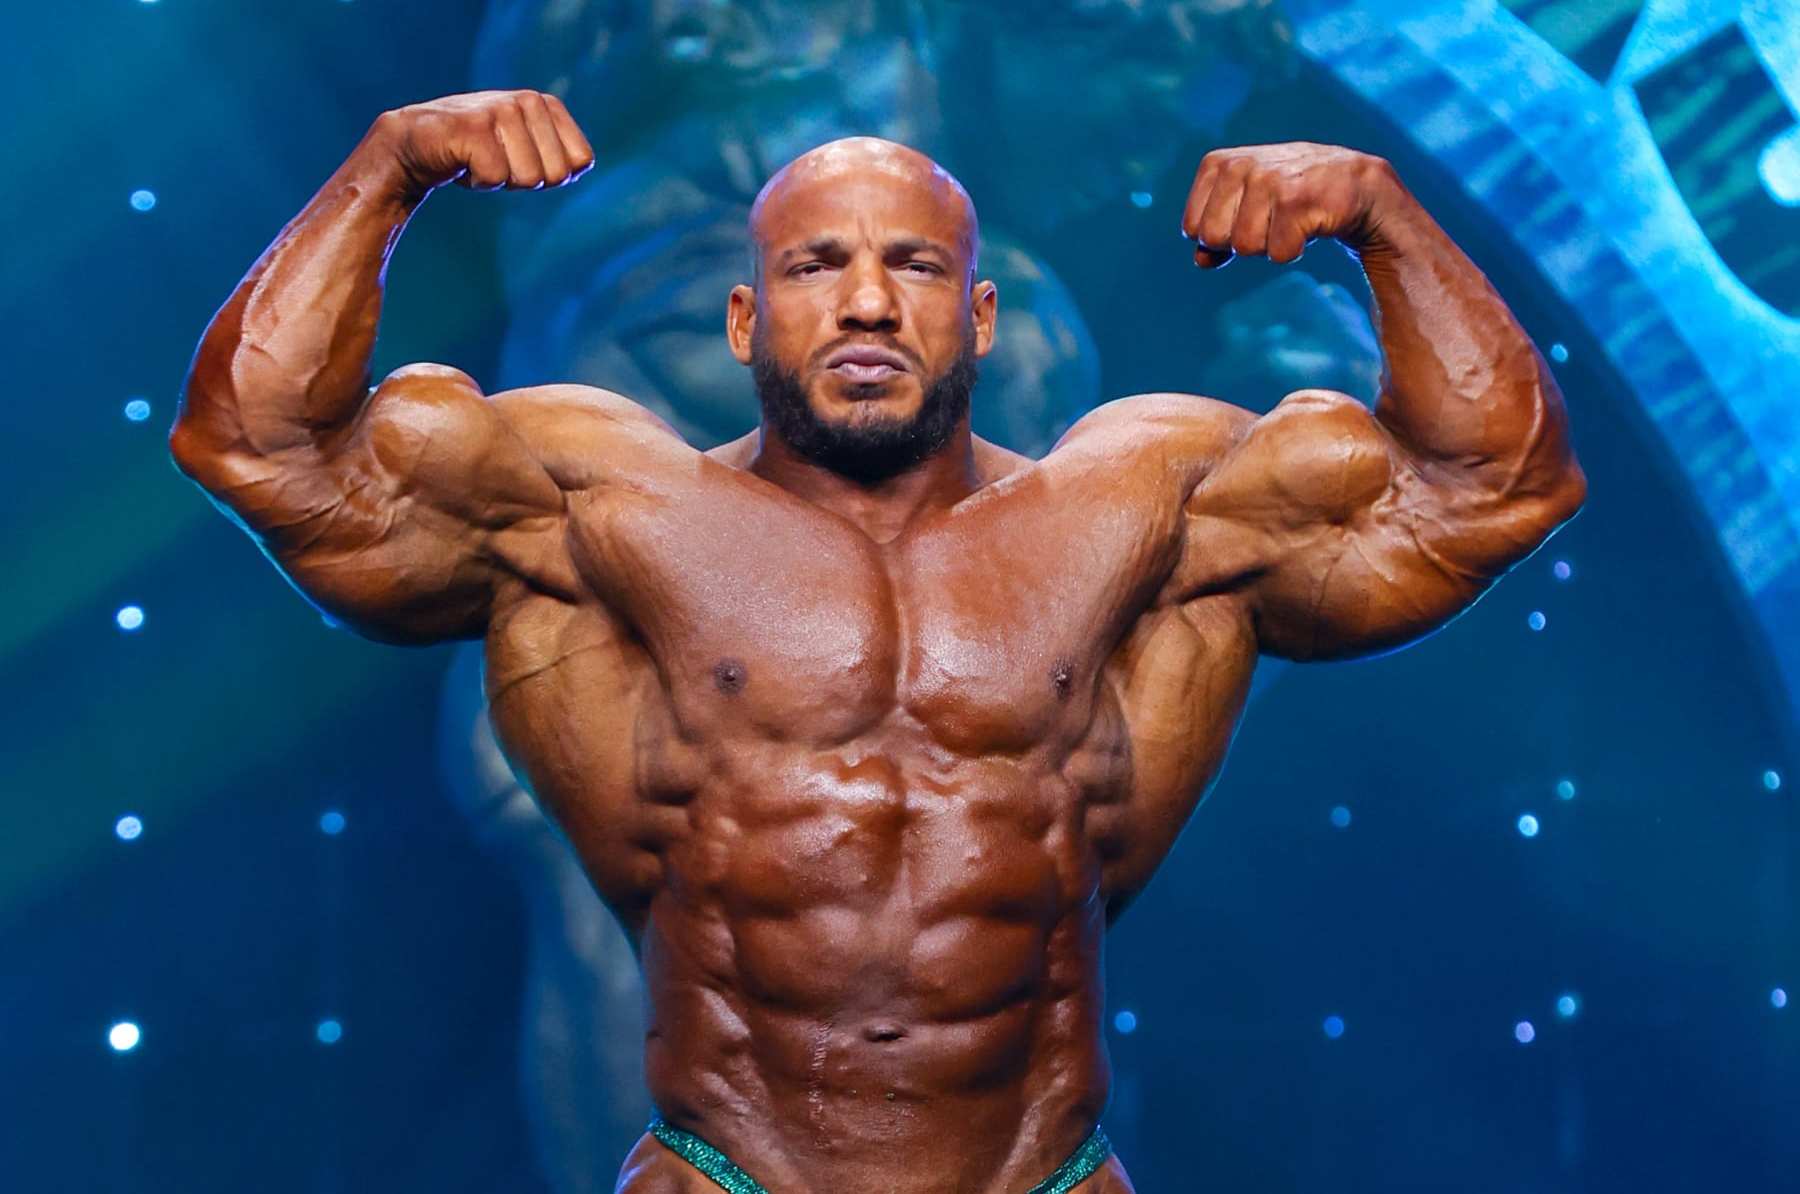 Mr. Olympia 2022: Final Results, Top Videos and Predictions for 2023 Event. News, Scores, Highlights, Stats, and Rumors